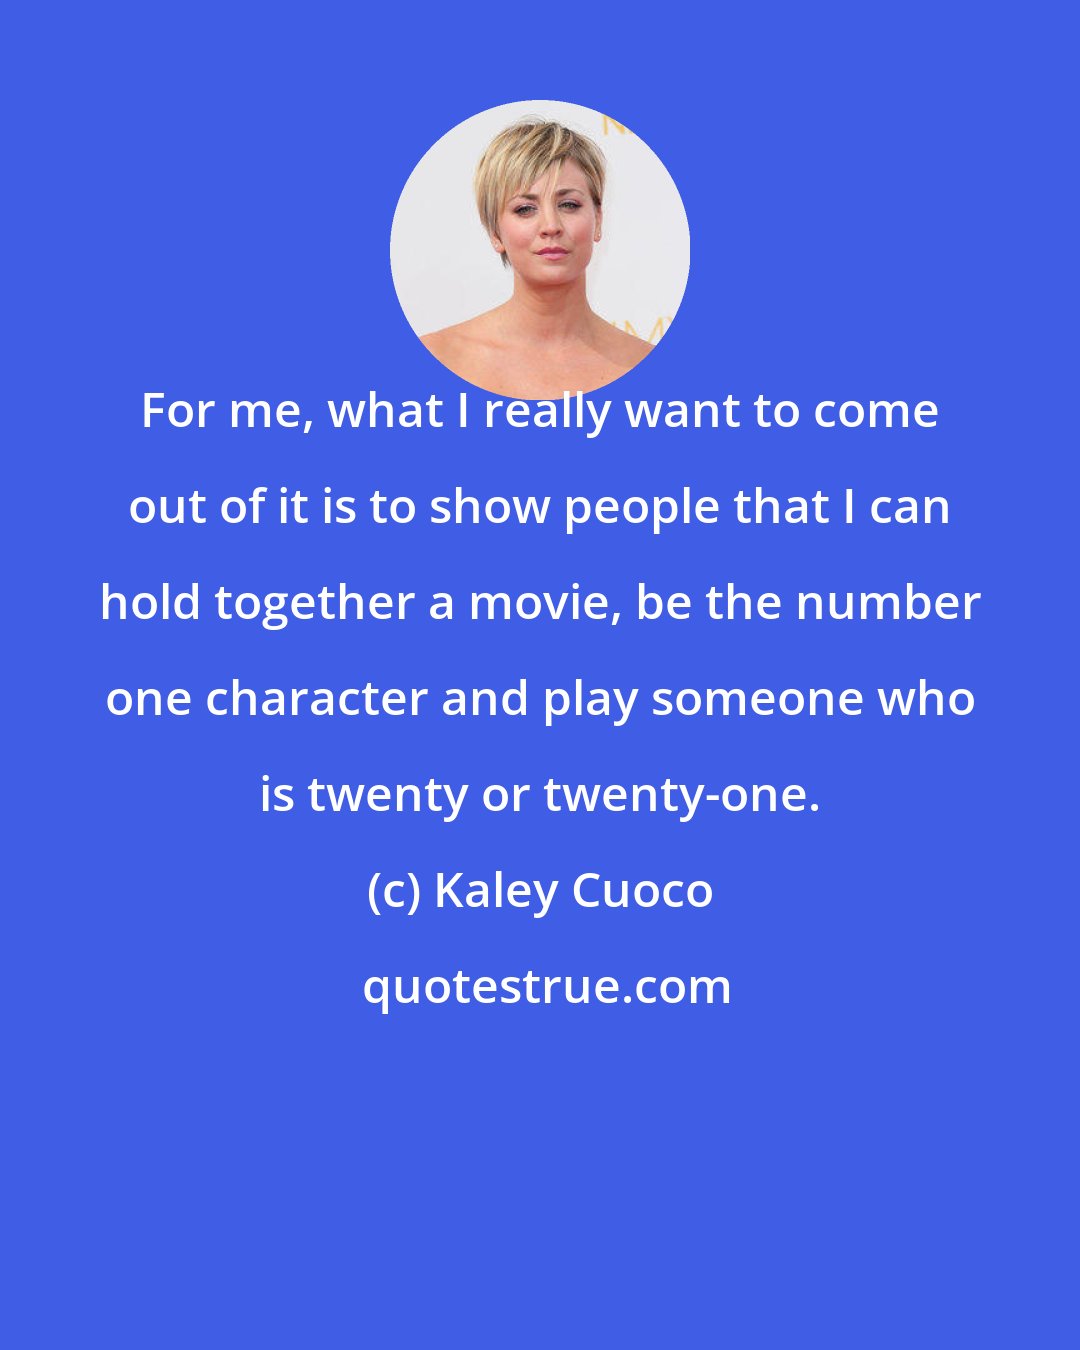 Kaley Cuoco: For me, what I really want to come out of it is to show people that I can hold together a movie, be the number one character and play someone who is twenty or twenty-one.